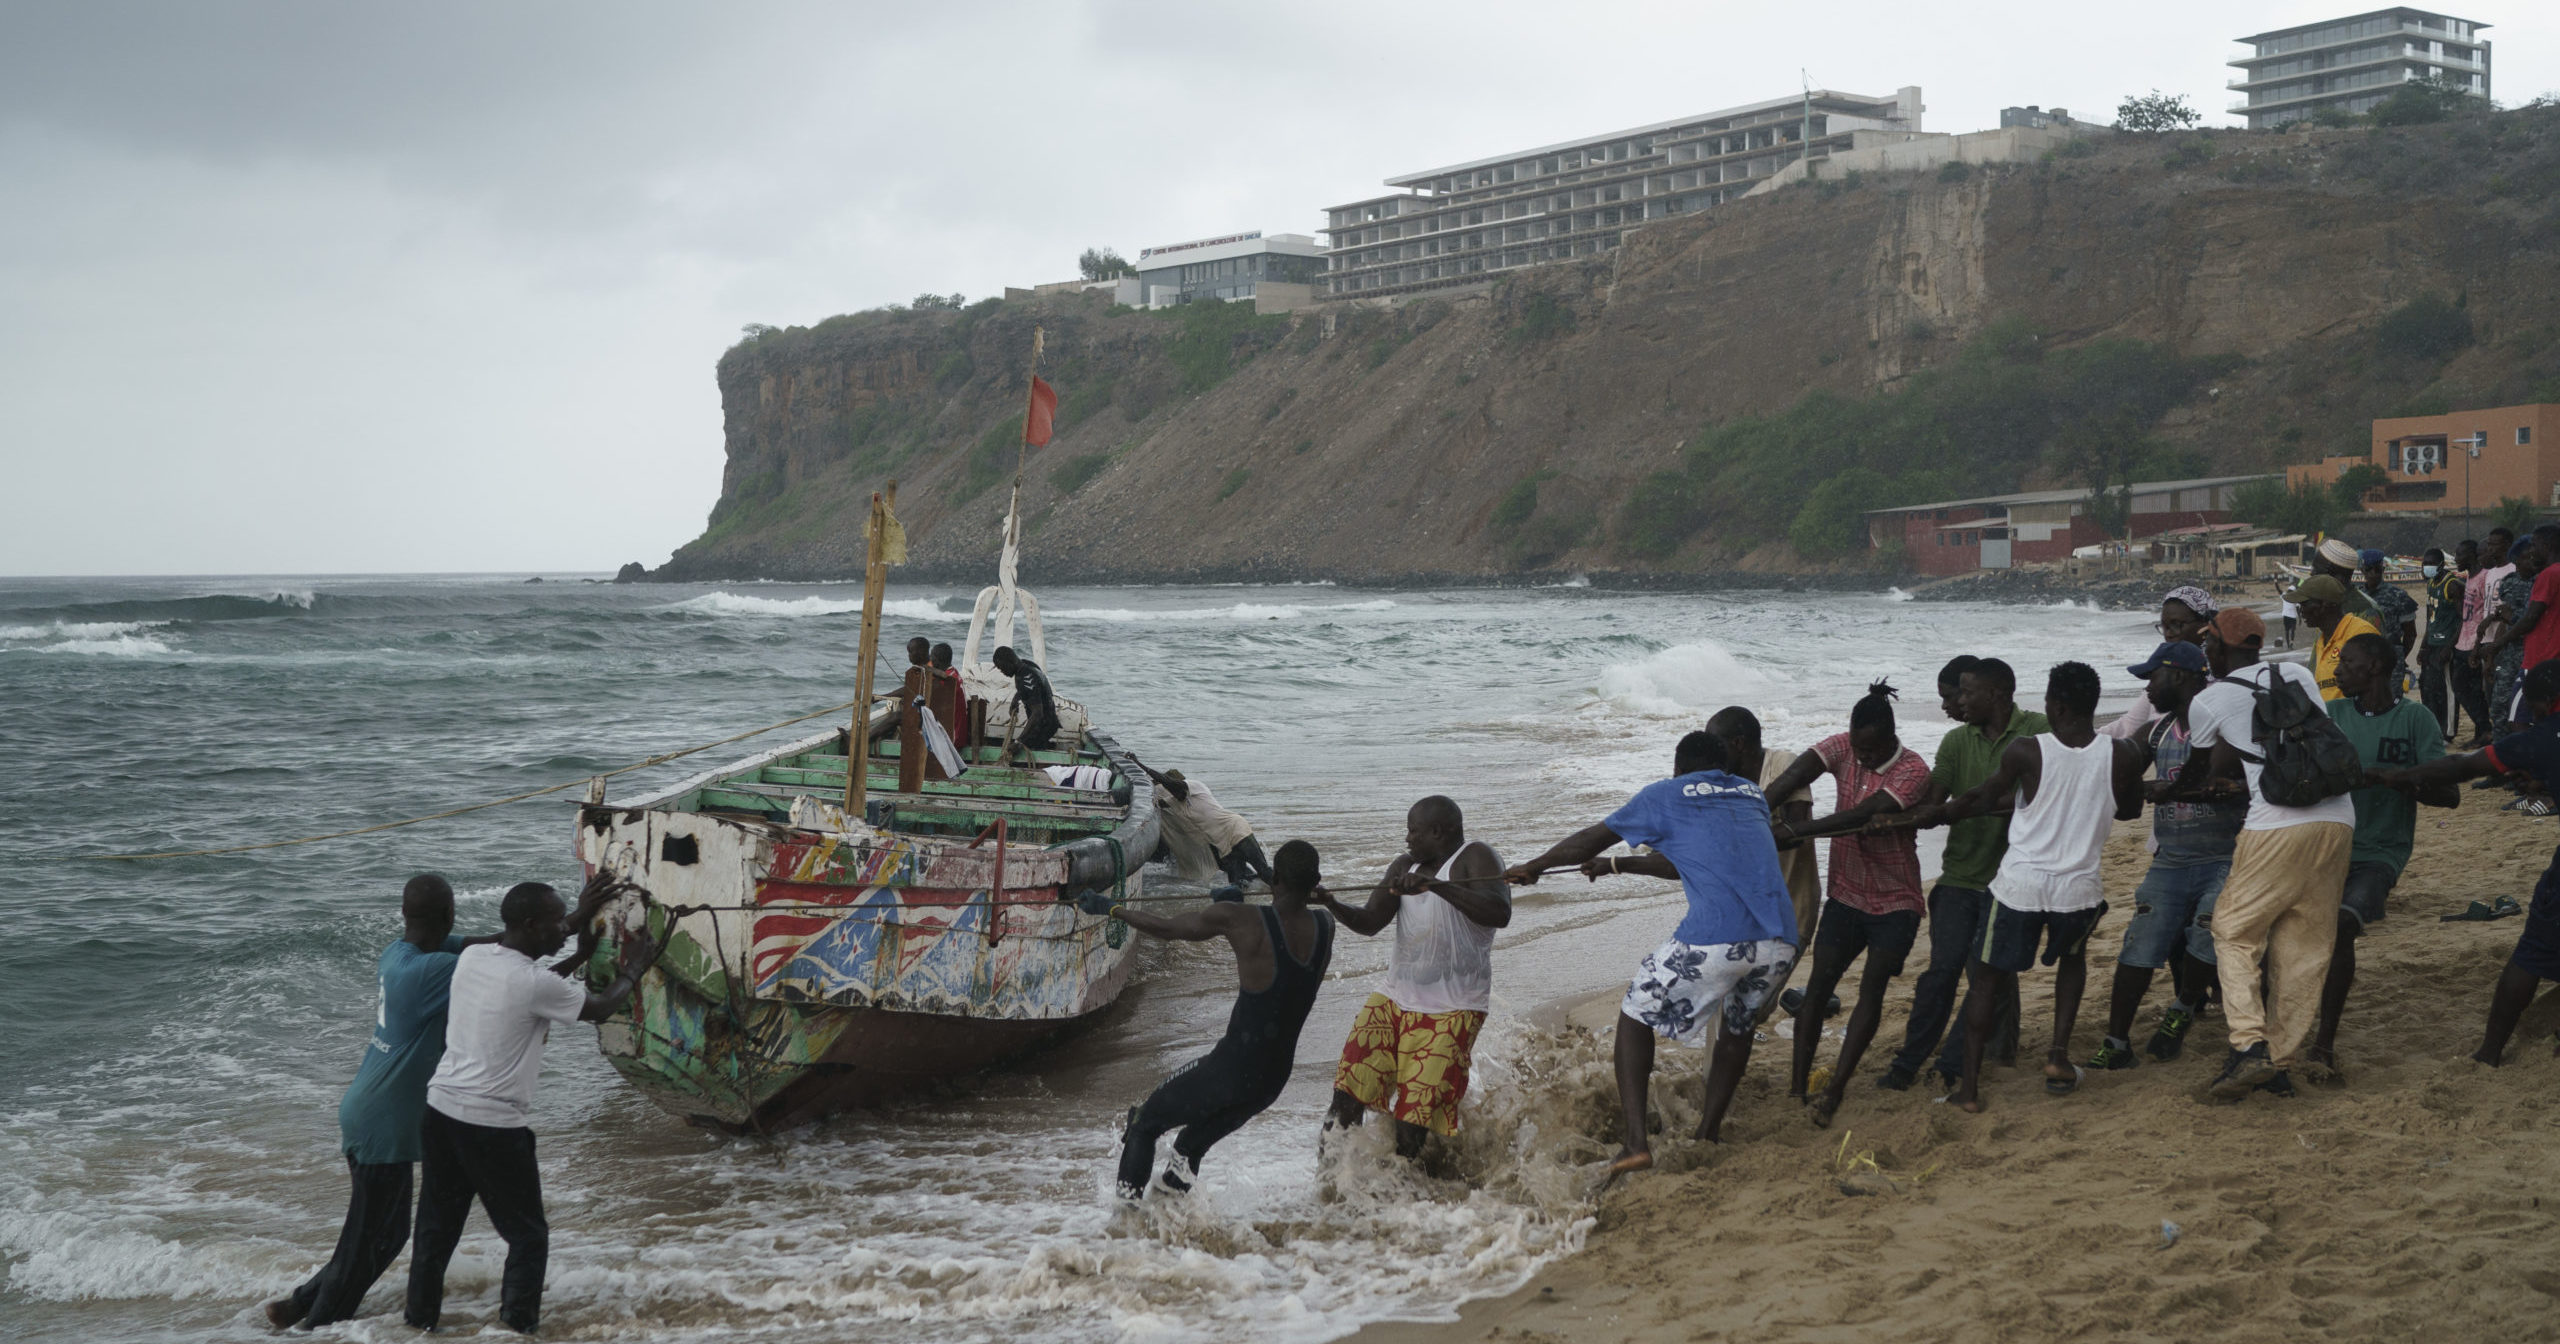 People work together to pull the capsized boat ashore at the beach where several people were found dead in Dakar, Senegal, on Monday.